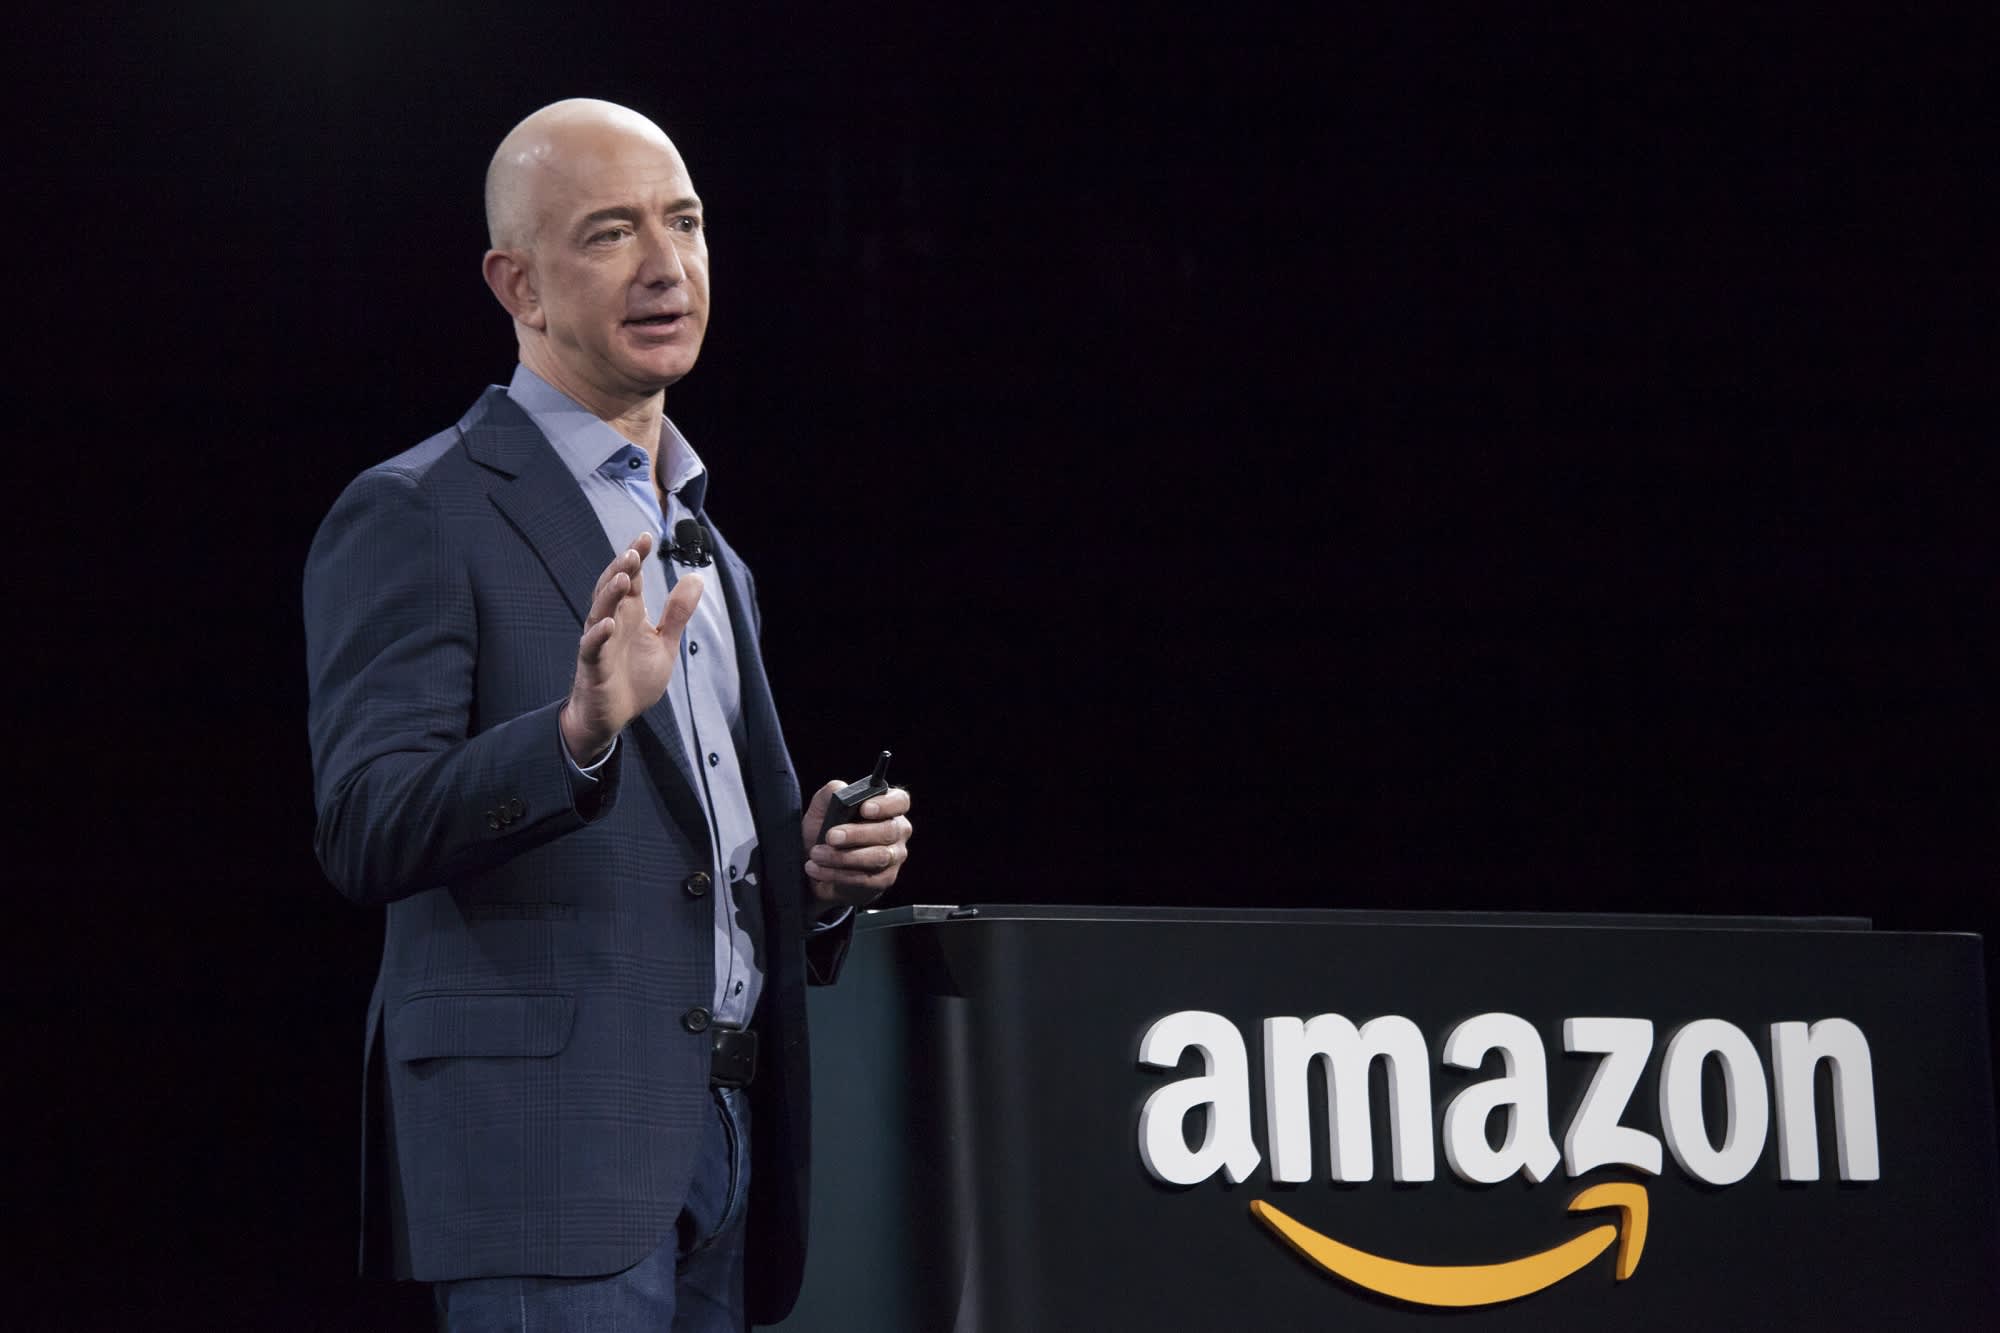 What Was Jeff Bezos’ Educational Background